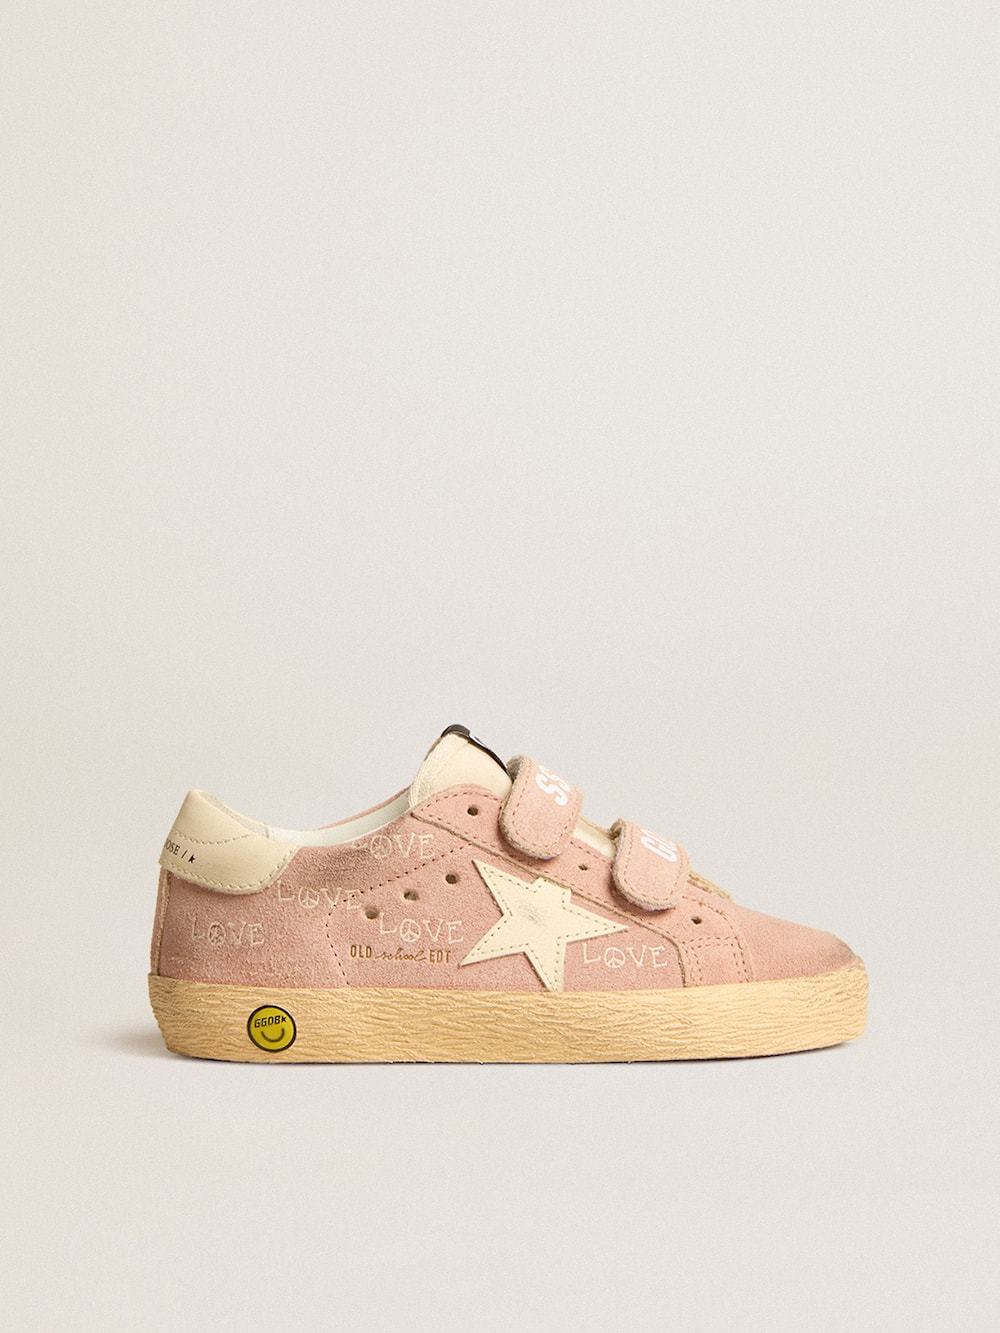 Golden Goose - Old School Young in pink suede with cream leather star and heel tab in 